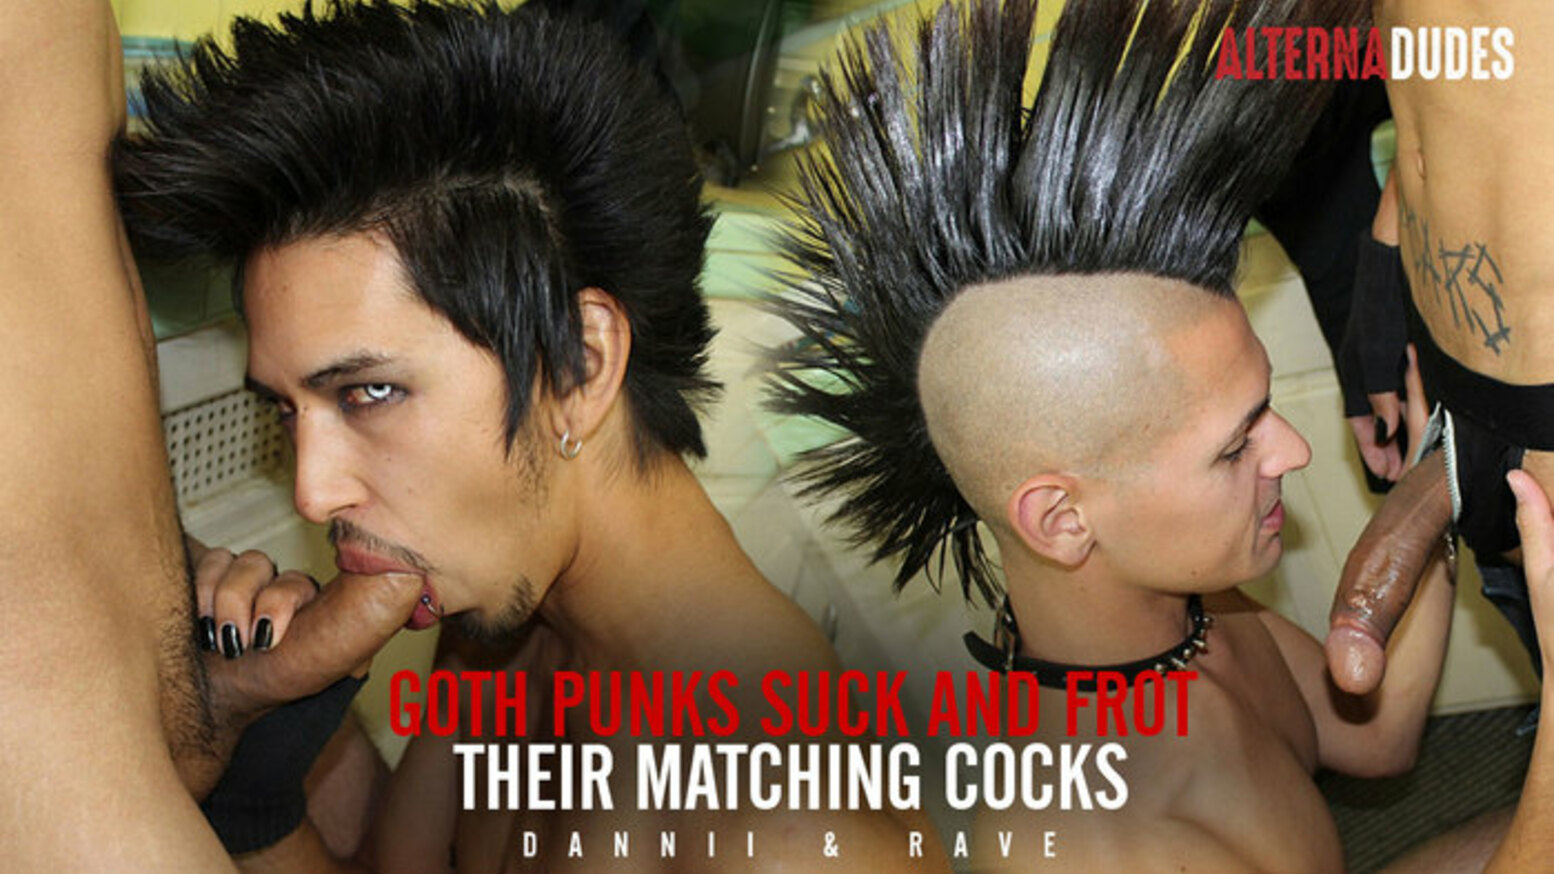 Goth Punks Suck and Frot Their Matching Cocks